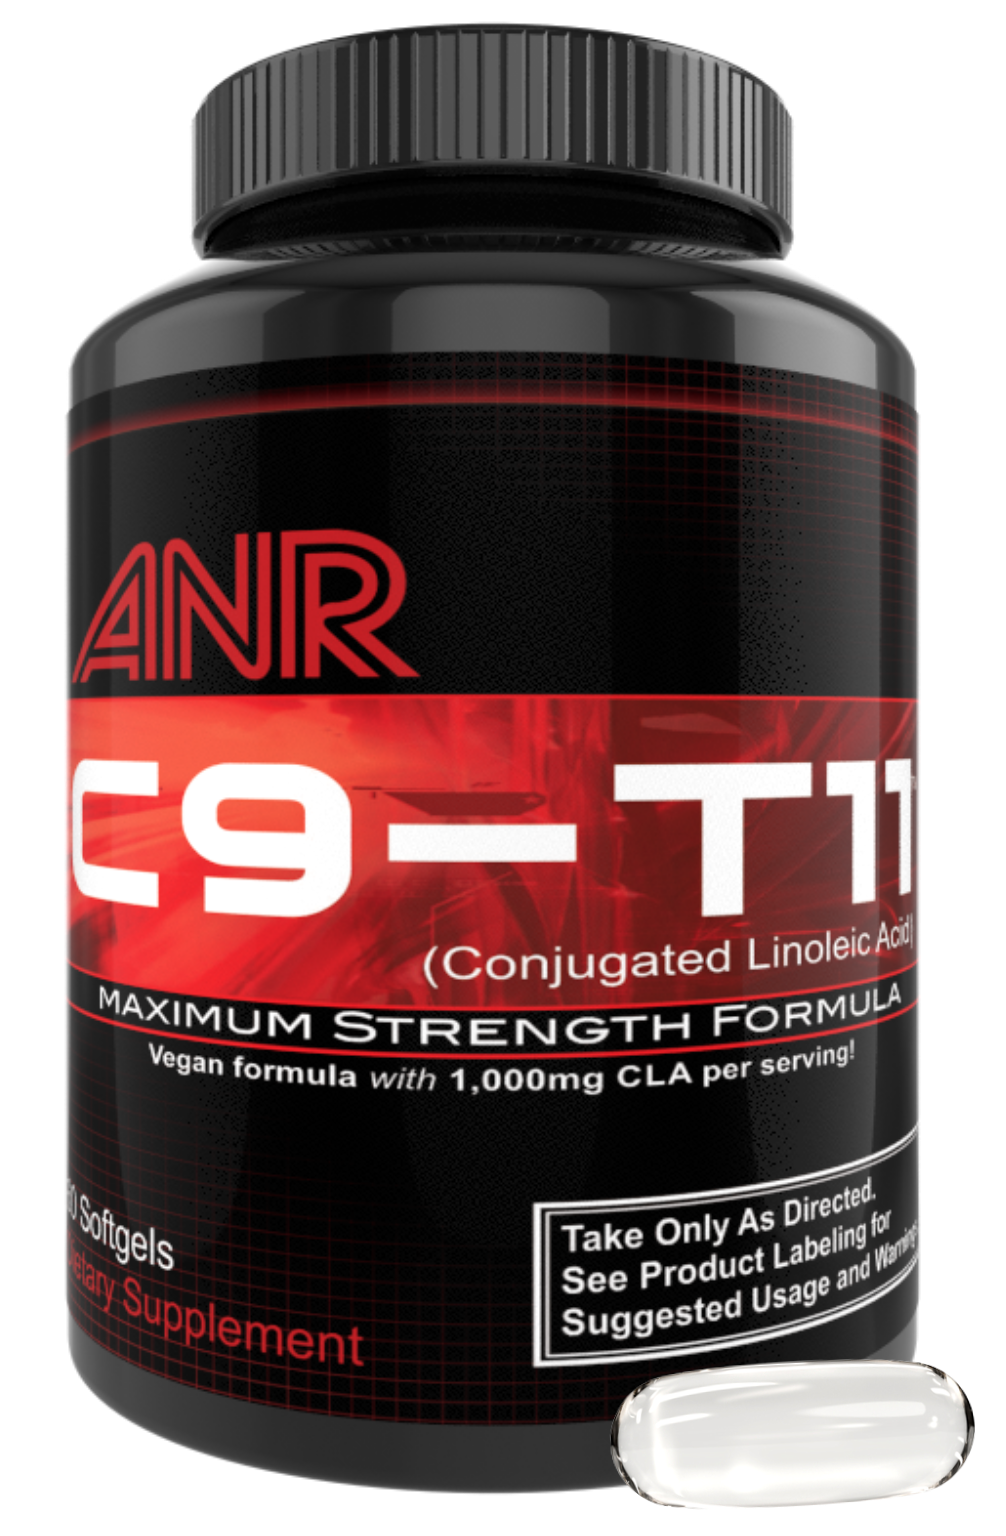 C9T11 Muscle Growth Complex - TeamANR